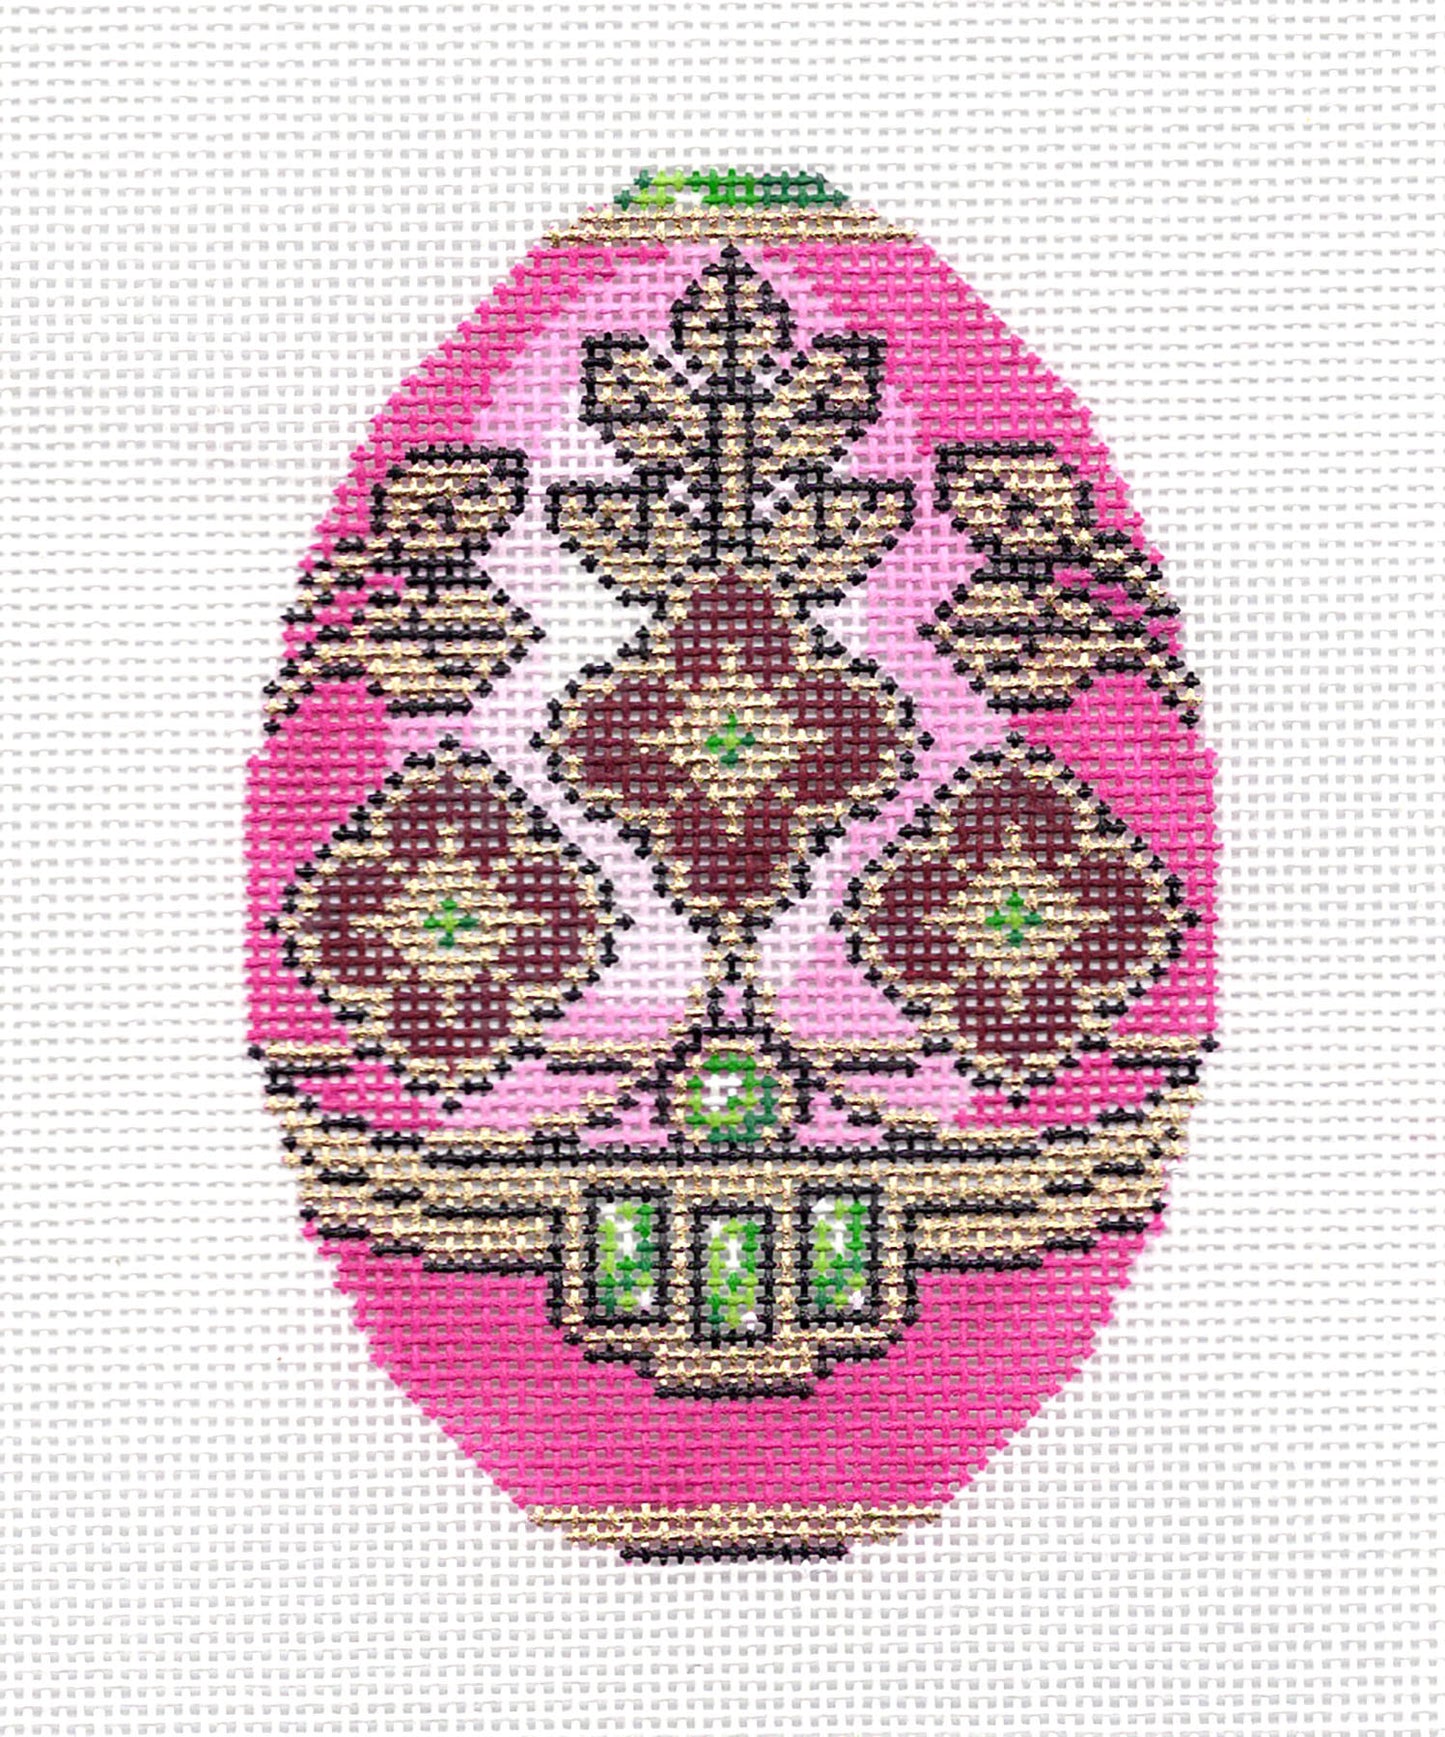 Faberge Egg ~ Jeweled EGG Pink and Gold handpainted Needlepoint Canvas Ornament by LEE